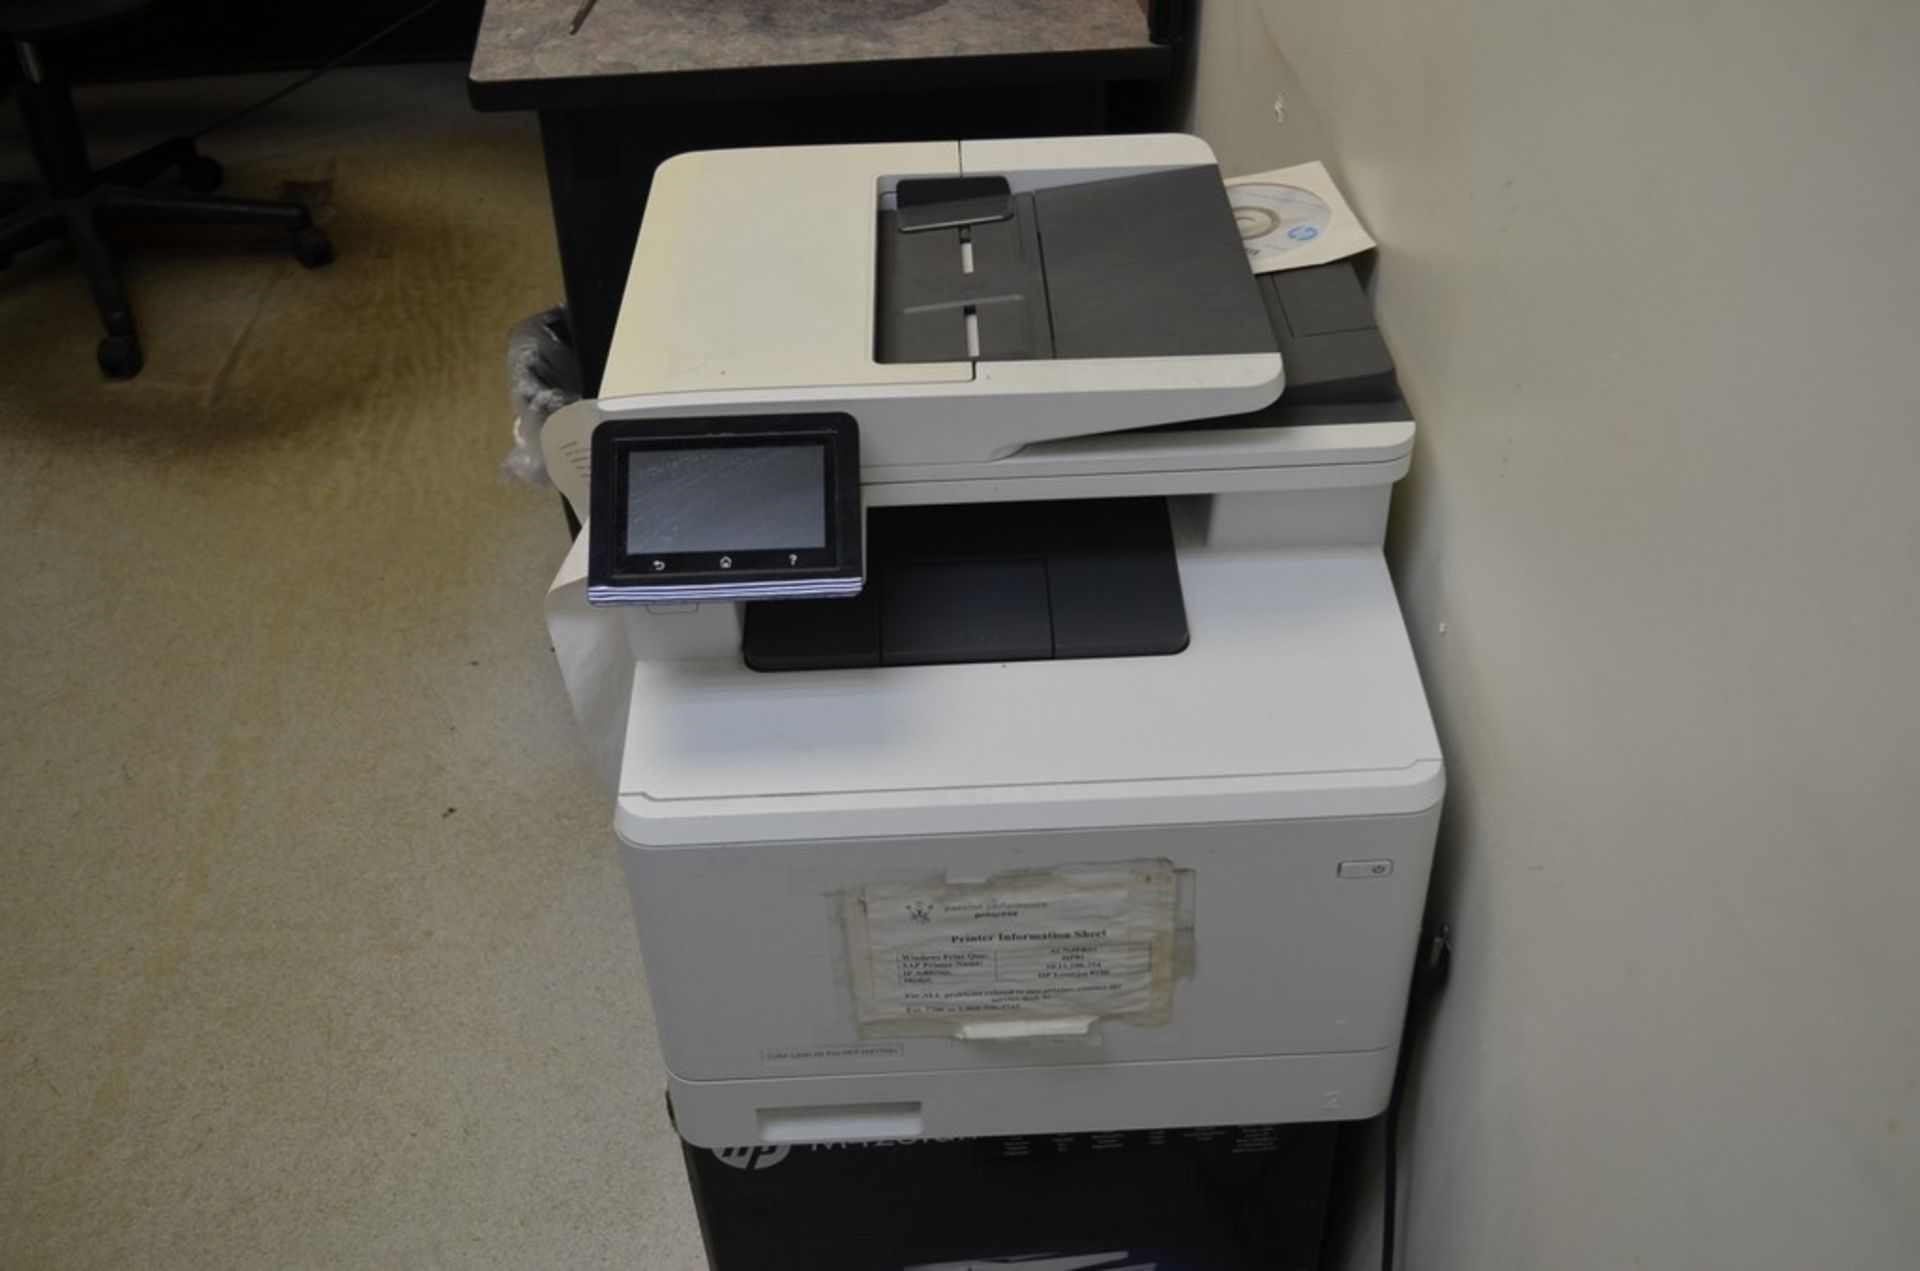 Lot - HP LaserJet Pro MFP477 fdn Printer and Furniture; Location in Plant: 2nd Floor Shipping/